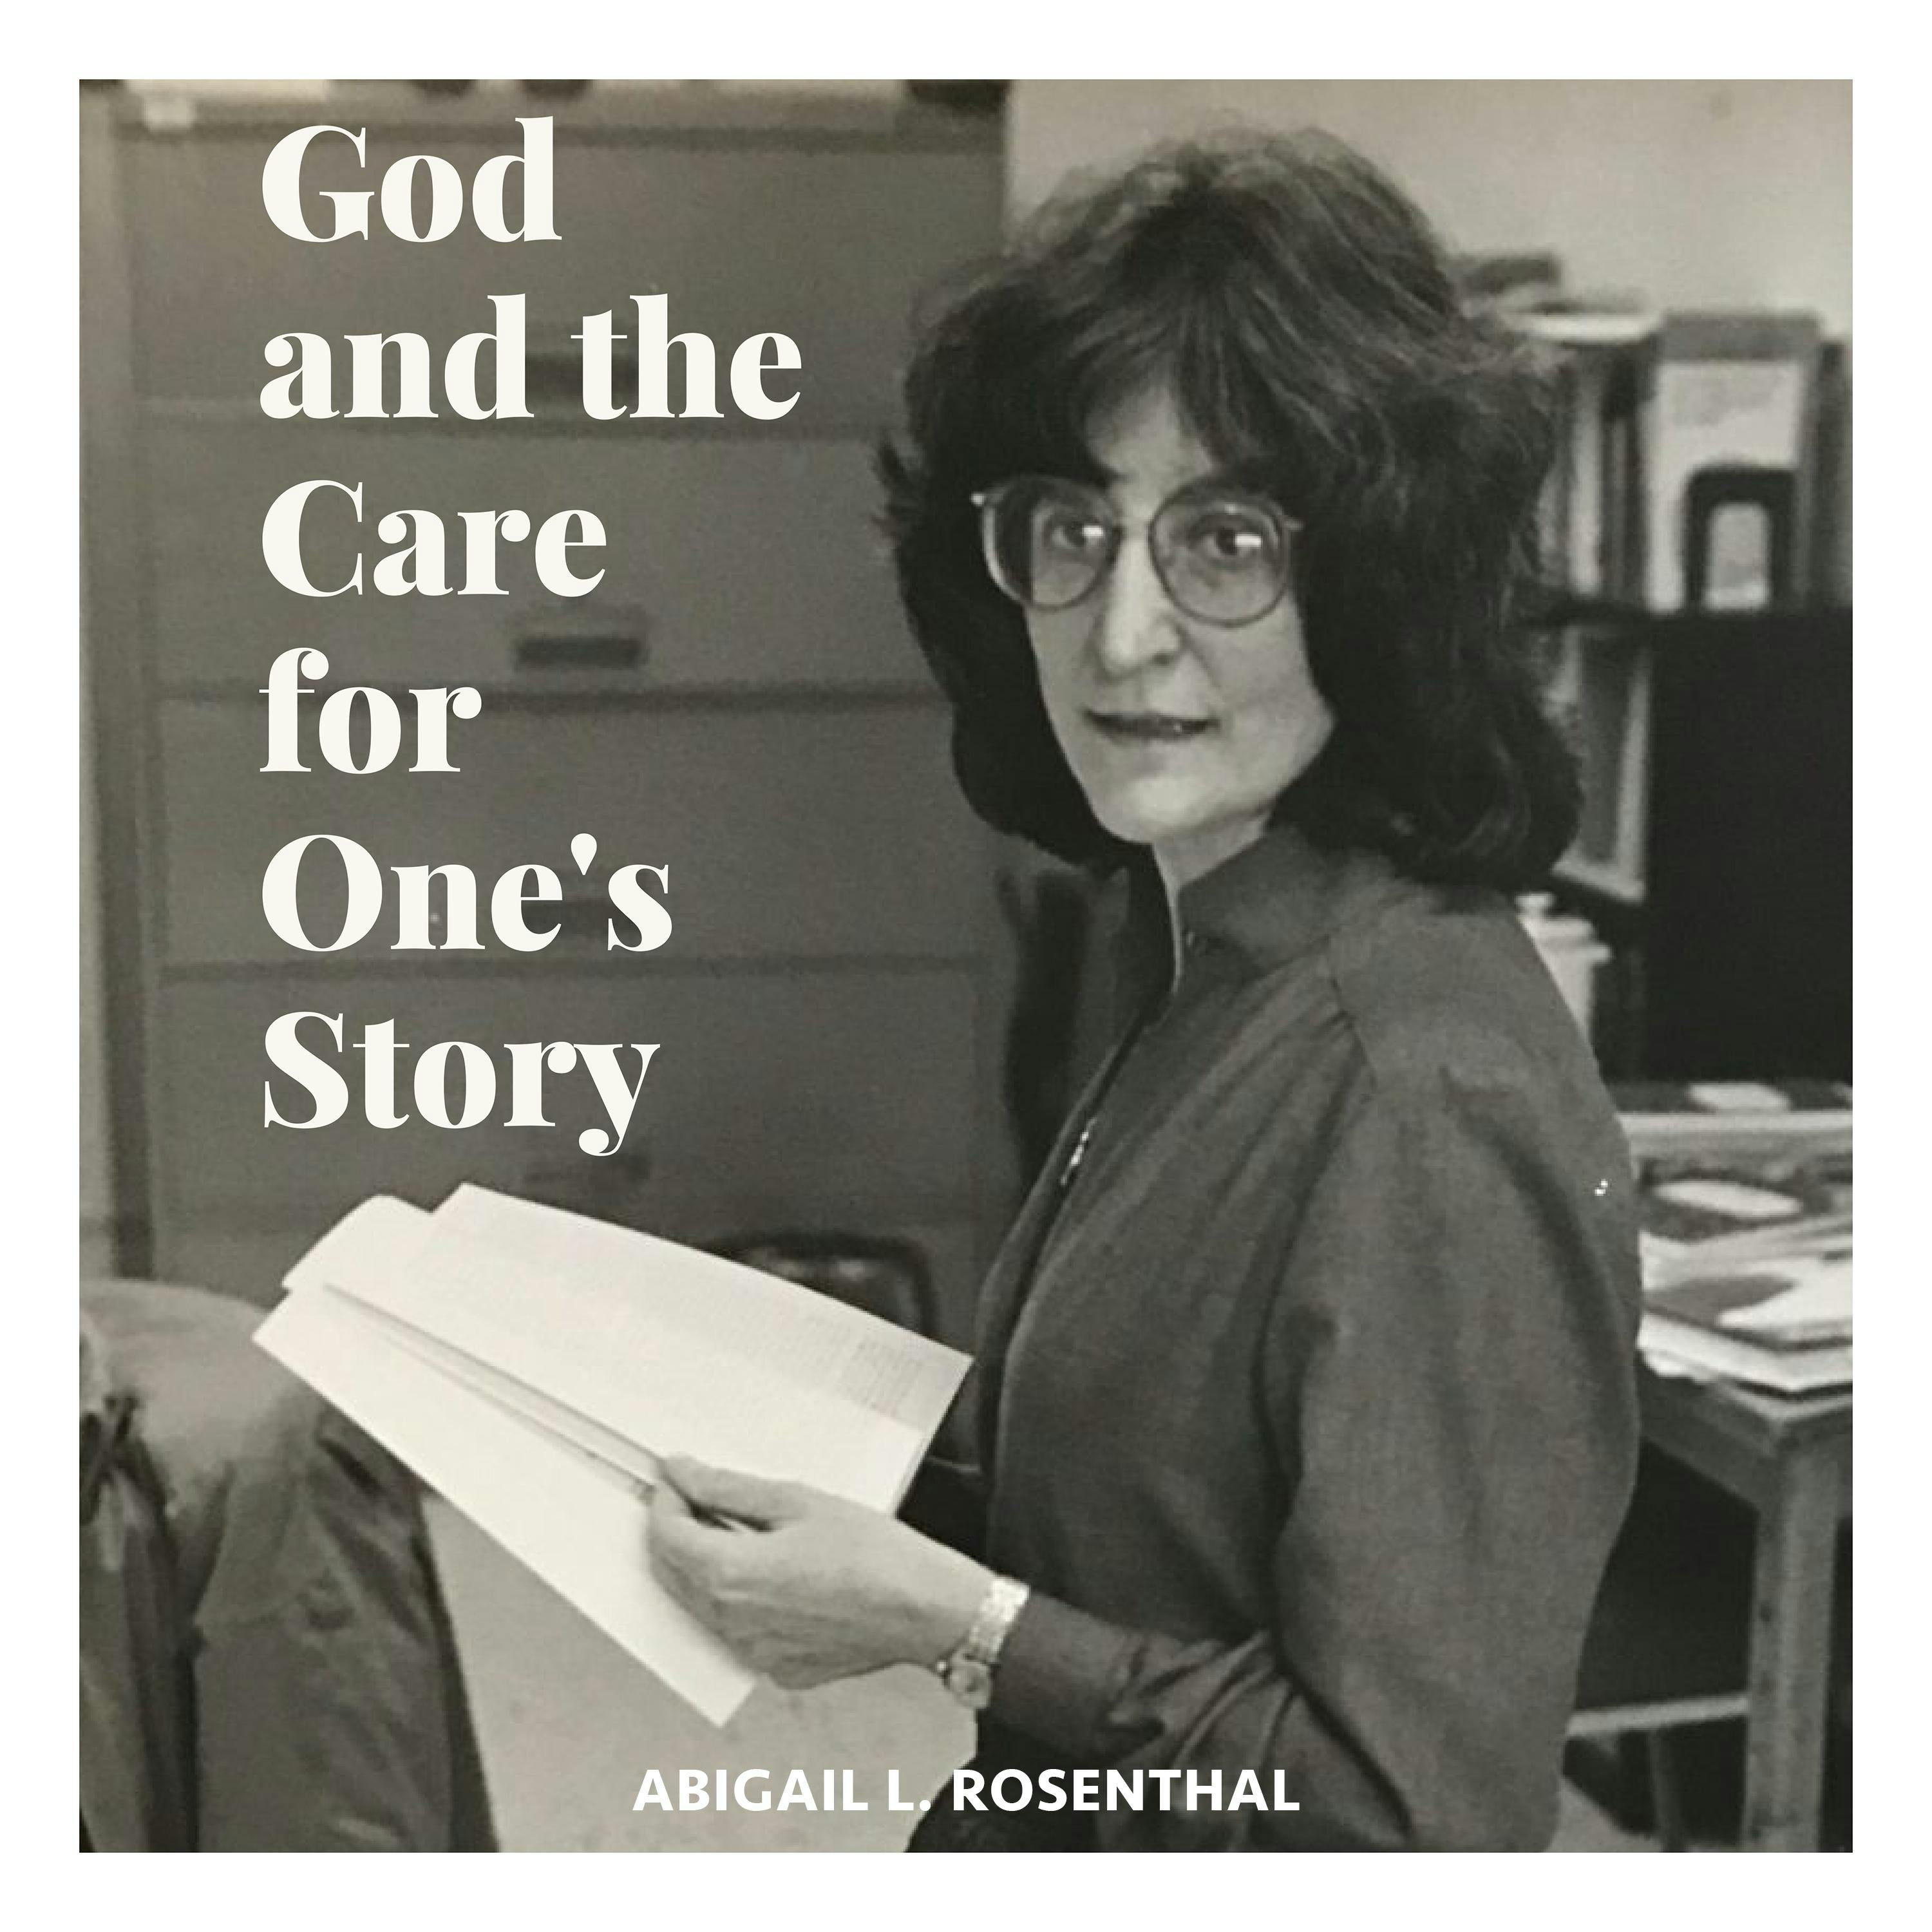 God and the Care for One's Story - Abigail L. Rosenthal